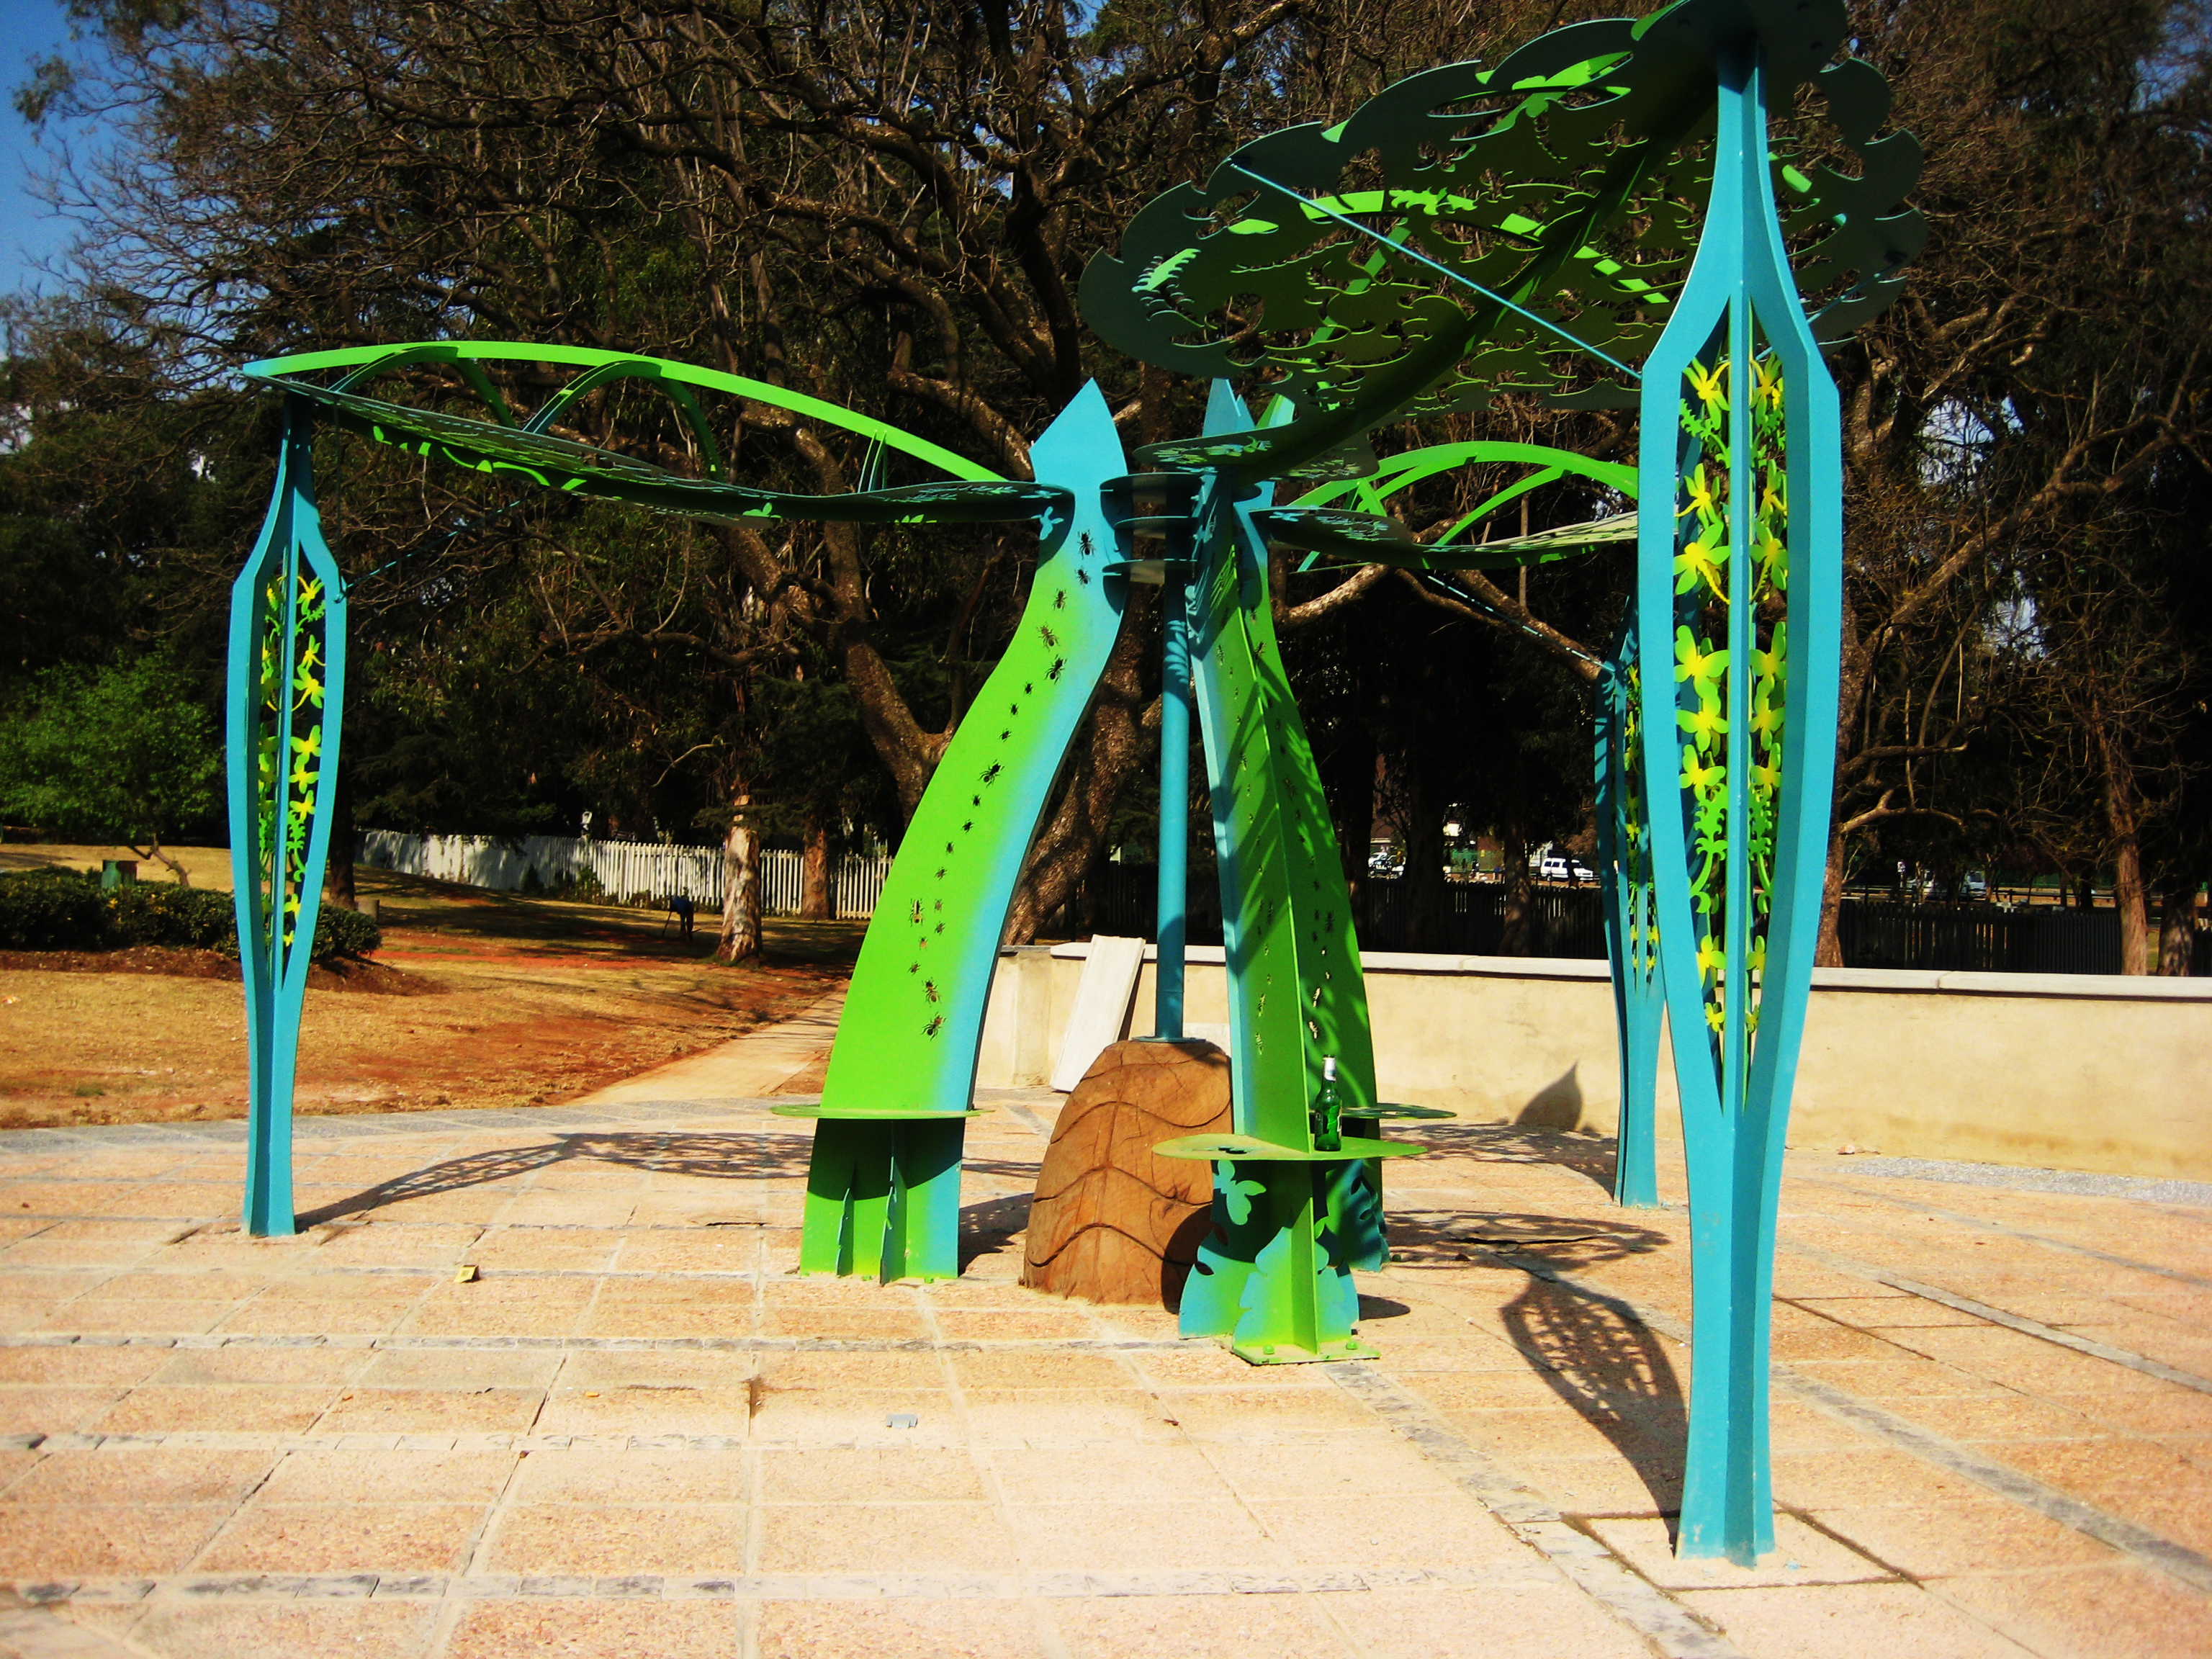 Tree sculpture in a playground